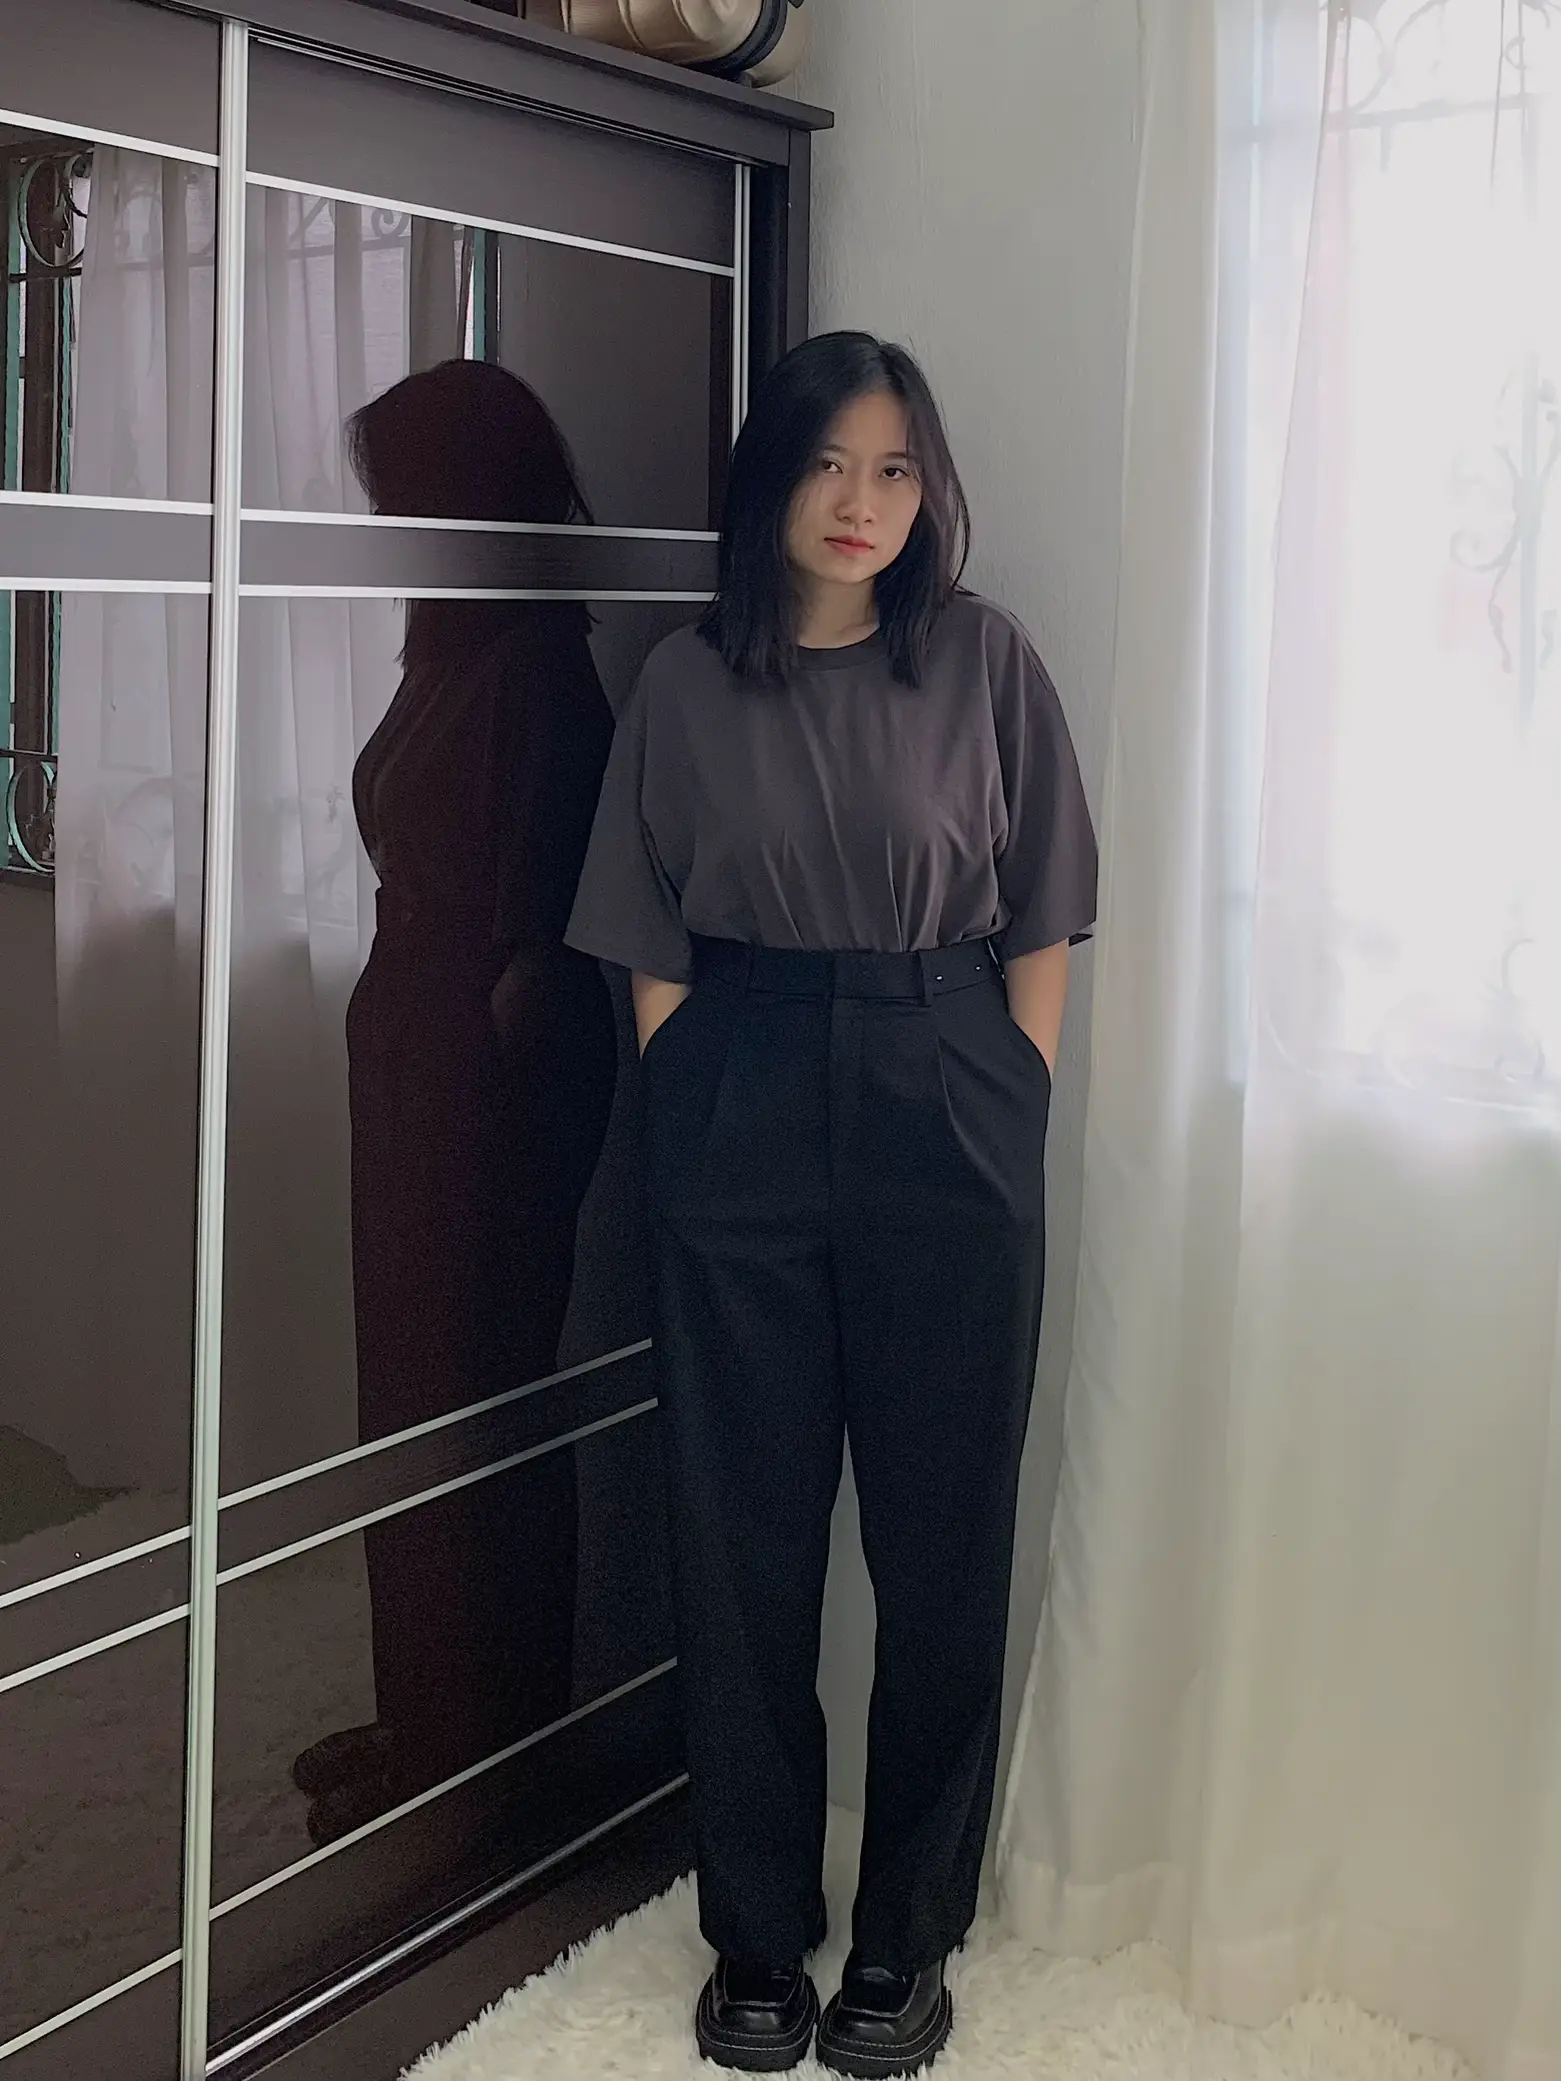 UNIQLO TRY ONS & REVIEW ON THE COMFIEST PANTS!